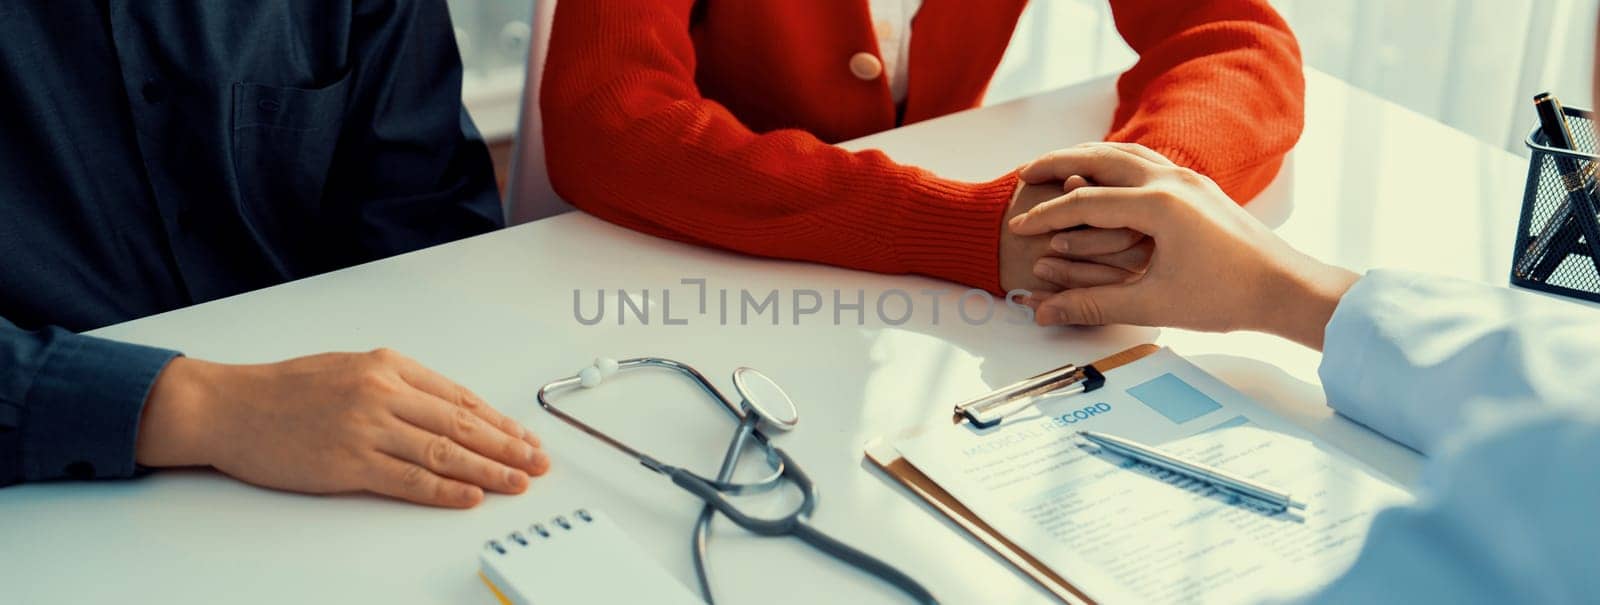 Couple attend fertility consultation with gynecologist at hospital. Rigid by biancoblue